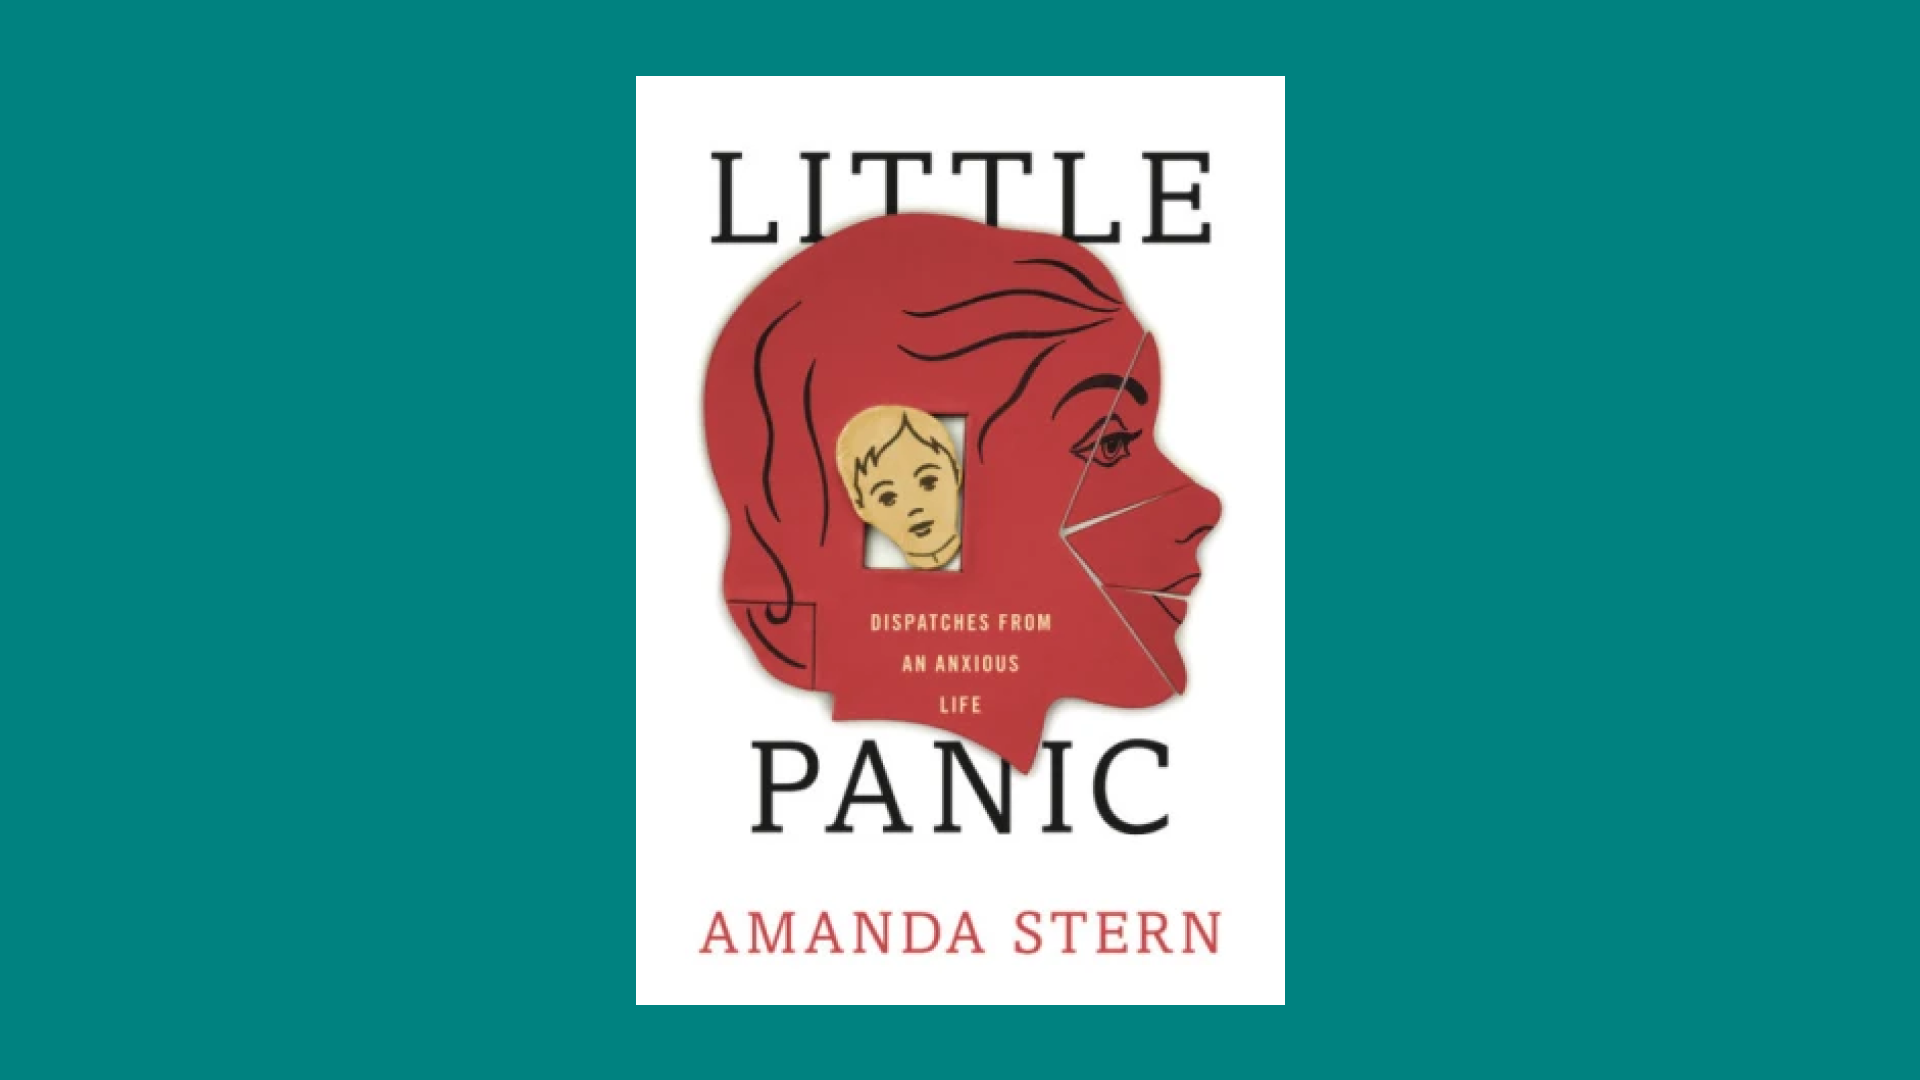 "Little Panic: Dispatches from an Anxious Life" by Amanda Stern